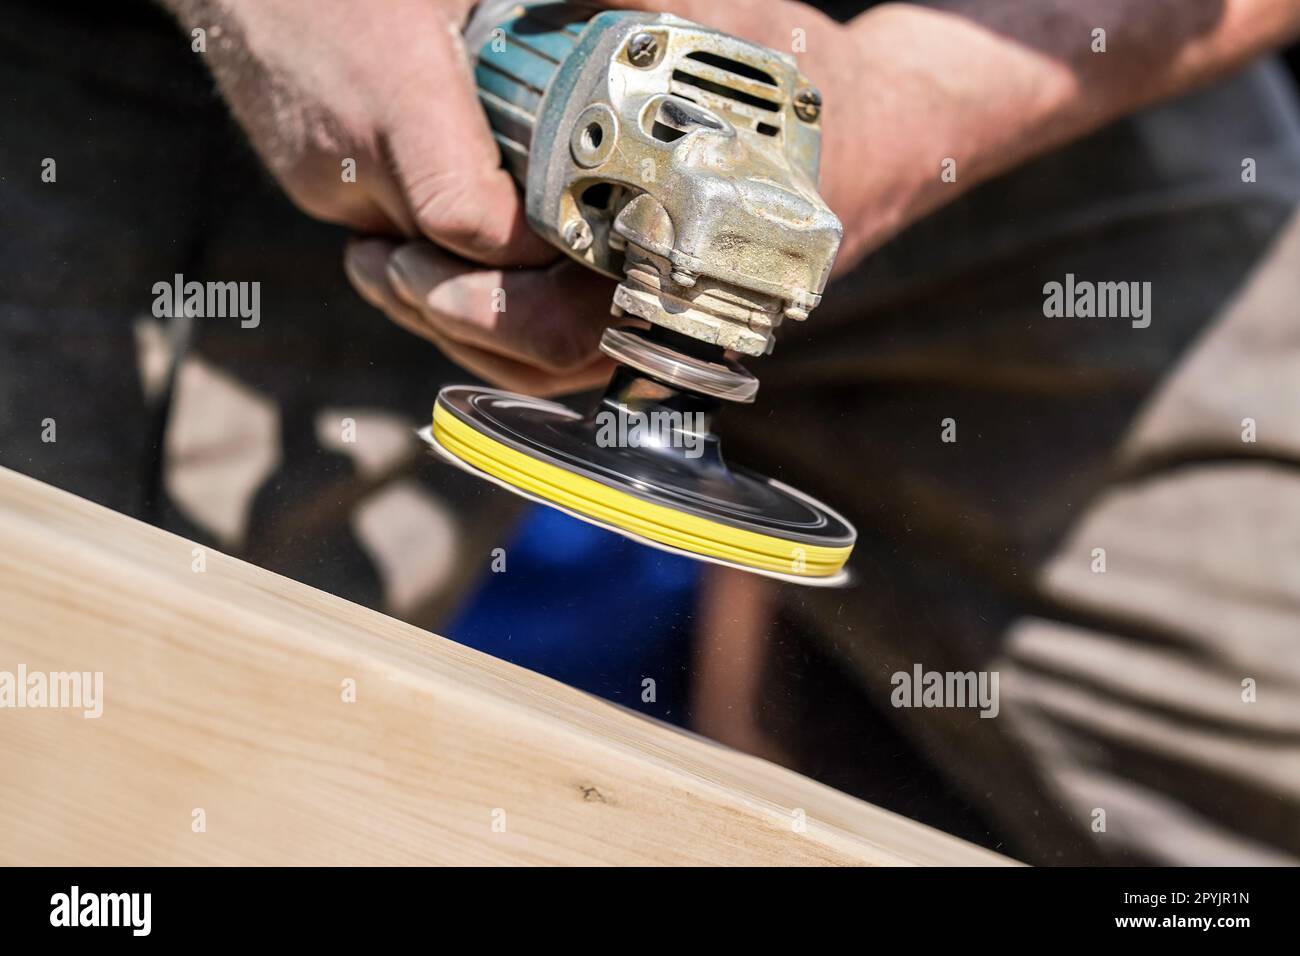 Man polishing wooden chest with old angle grinder during sunny day, closeup detail to hands without gloves, fine wood dust flying in air Stock Photo